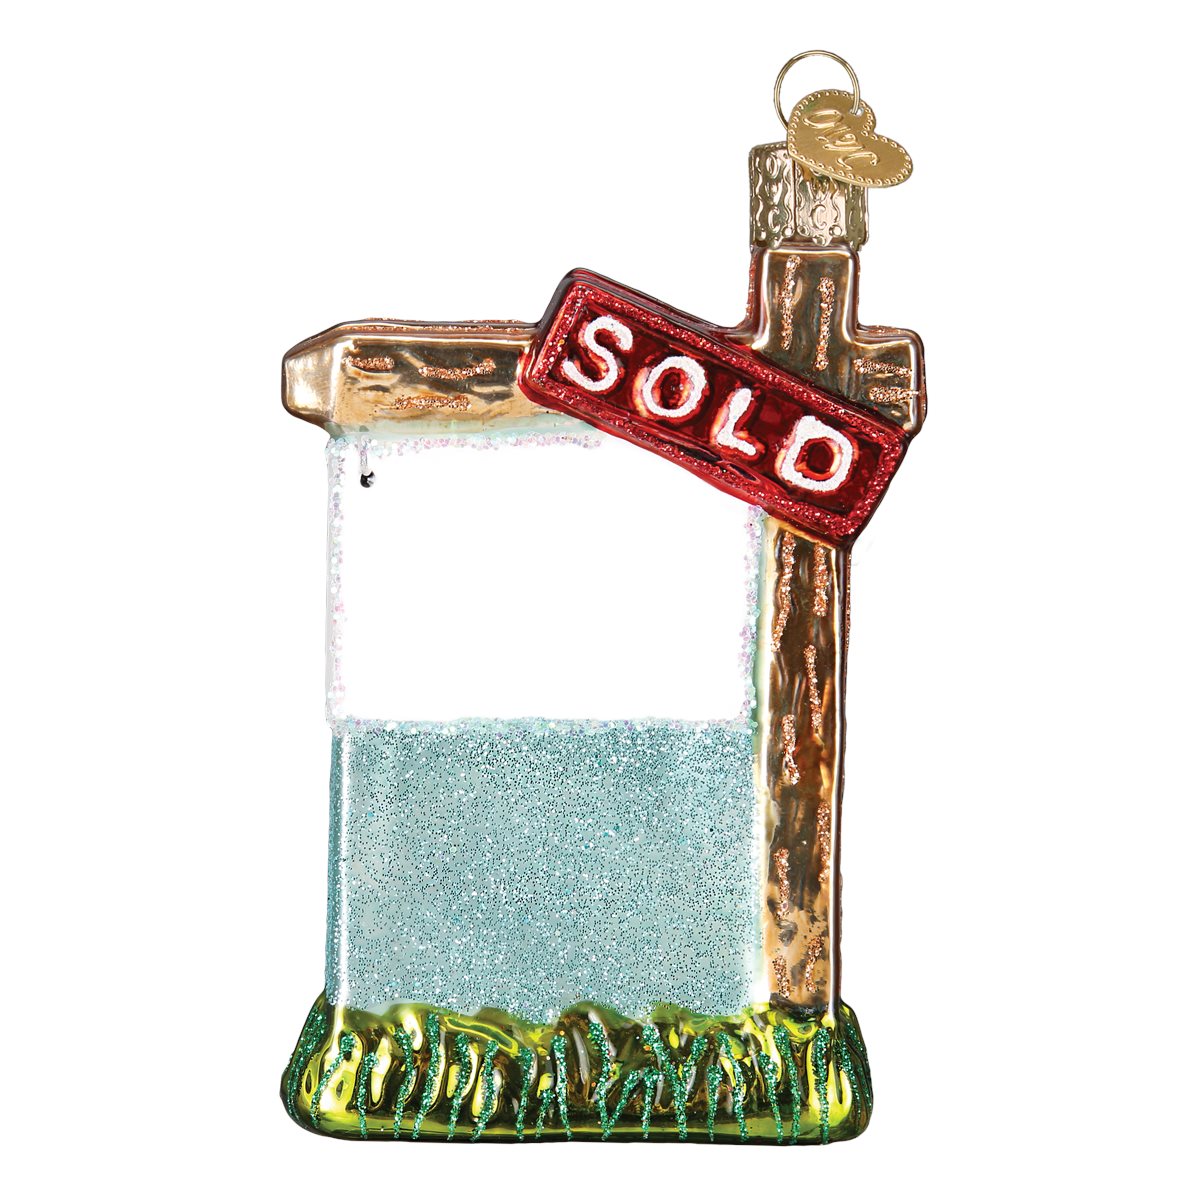 Realty Sign Ornament